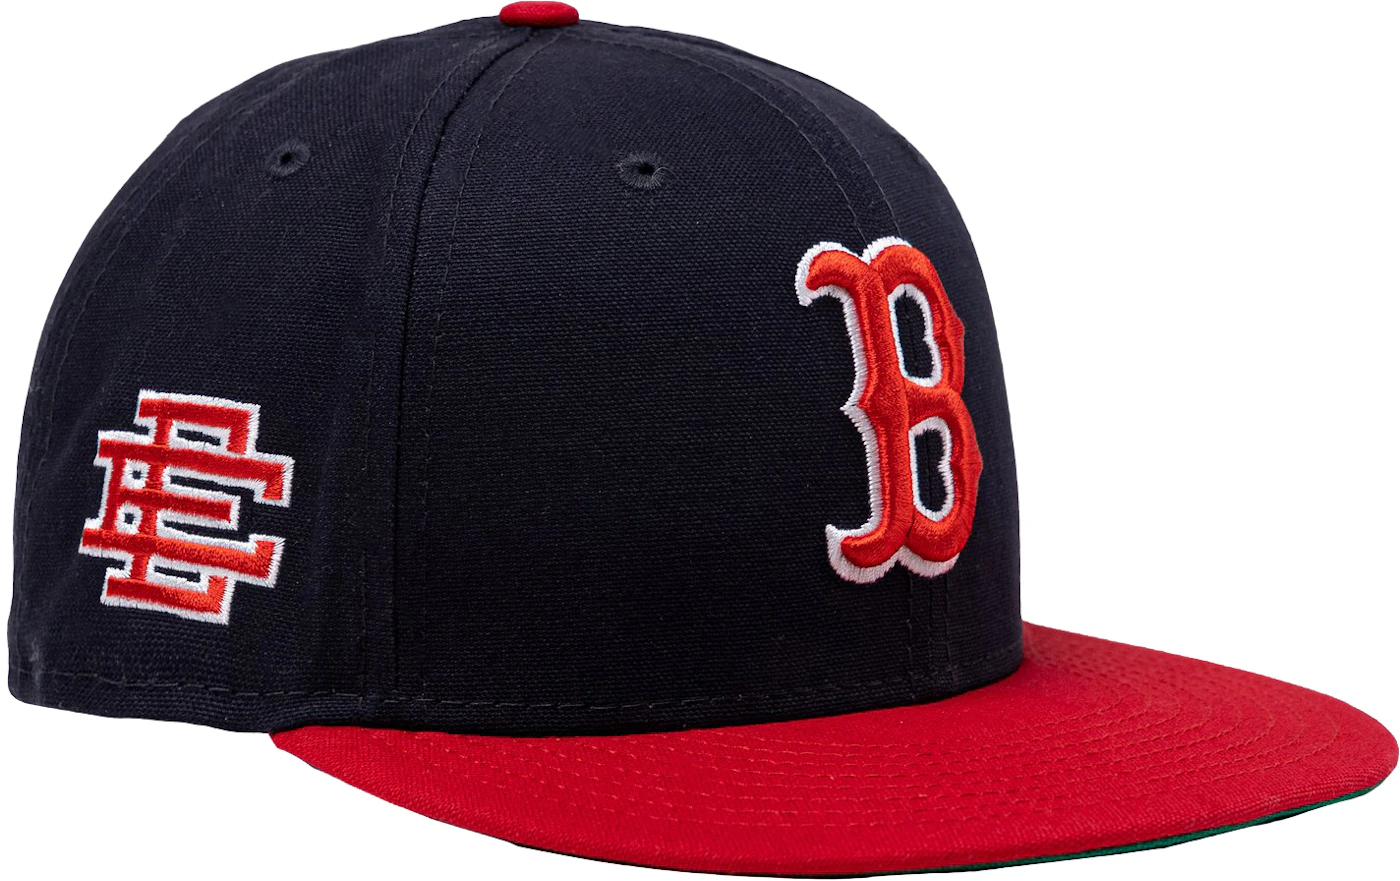 Eric Emanuel EE Boston Red Sox NE 59Fifty Fitted Hat Navy/Red Men's ...